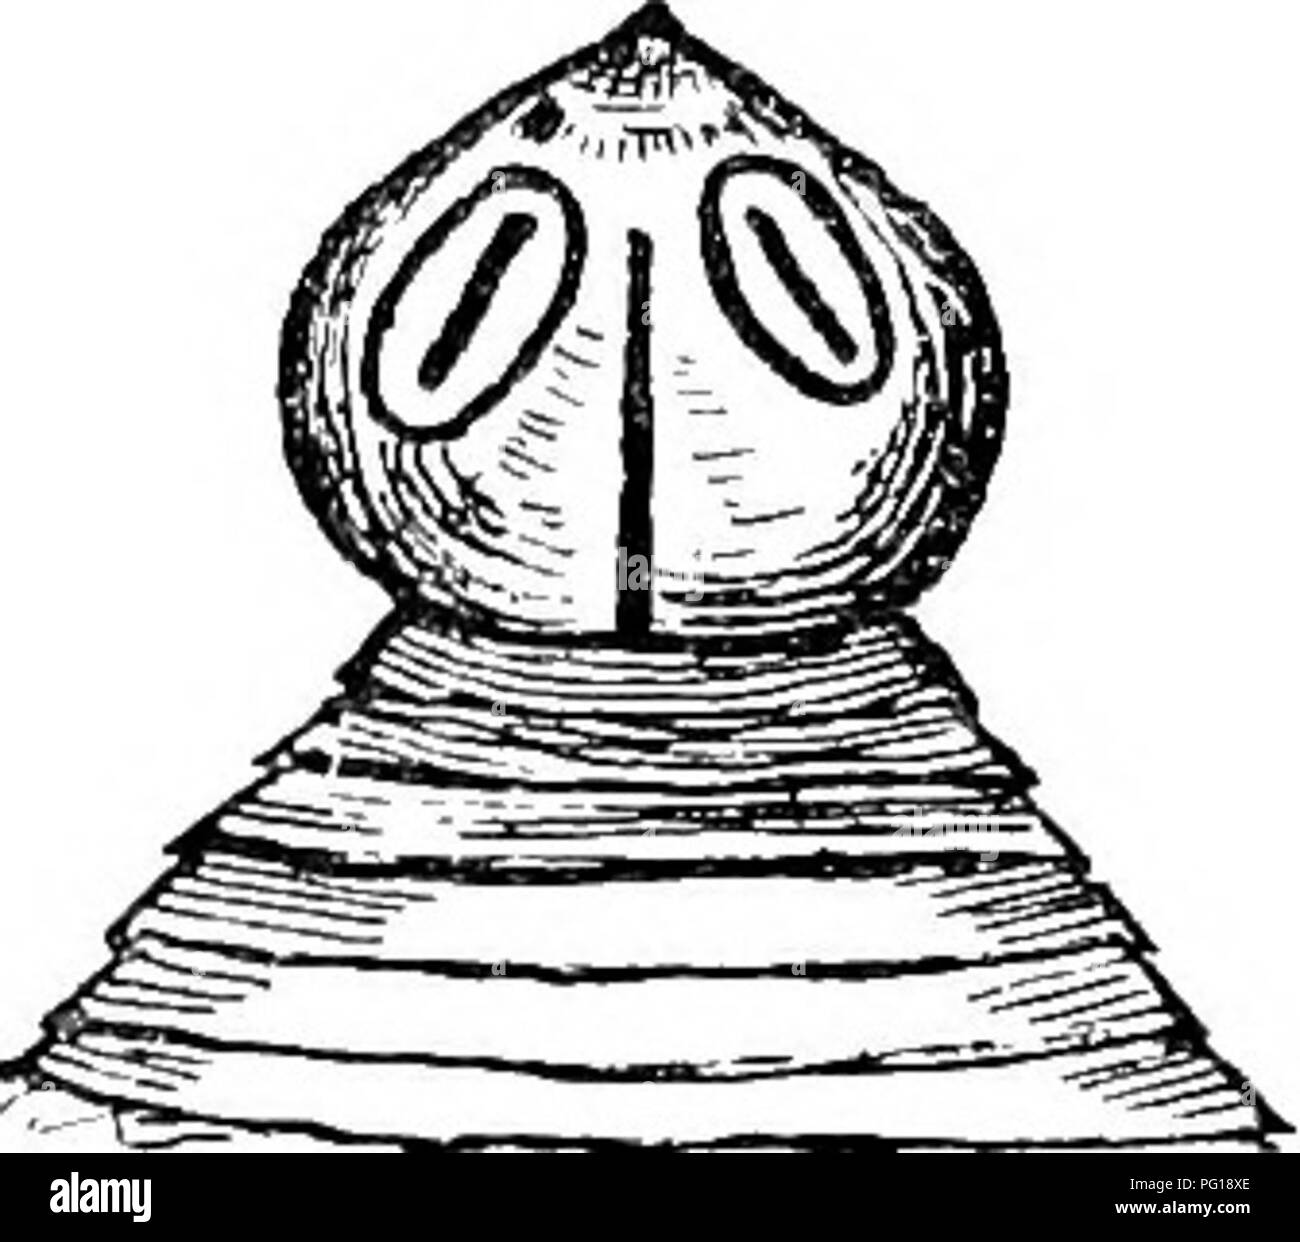 . Veterinary parasitology . Domestic animals; Veterinary parasitology. Fig. 14.—Head of T/enia Fig. 15.—Head of Taenia Plicata. Mamillana. Ascaris Megalocephala.—This is a large round-worm, of a whitish or yellowish colour, often present in the intestines of the horse. The female ranges from 6 to 13 inches in length, and the males from 5 to 12 inches. The body is stiff and cylindrical, while the head is large, easily visible, and set upon a well-marked constriction, or neck. It carries three lips. The male possesses two wing-like outgrowths—one on each side of the tail. The life-history has be Stock Photo